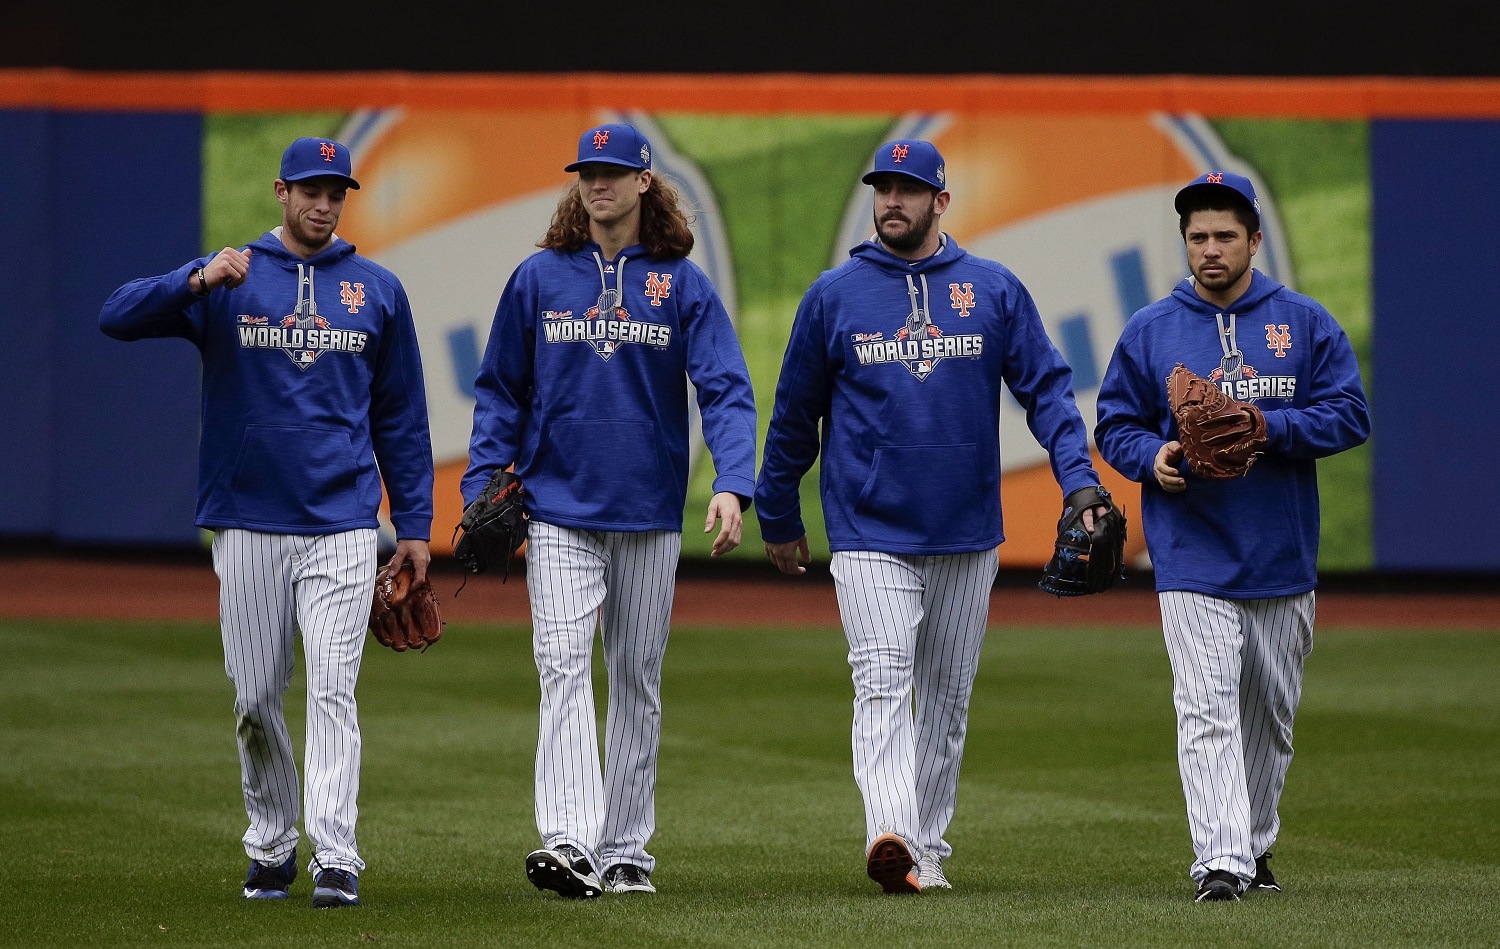 From left, New York Mets pitchers Steven Matz, Jacob deGrom and Matt Harvey and catcher Travis d'Arnaud walk off the field at the end of batting practice, Saturday, Oct. 24, 2015, in New York.  The Mets will face the Kansas City Royals in Game 1 of the World Series on Tuesday. (AP Photo/Julie Jacobson)